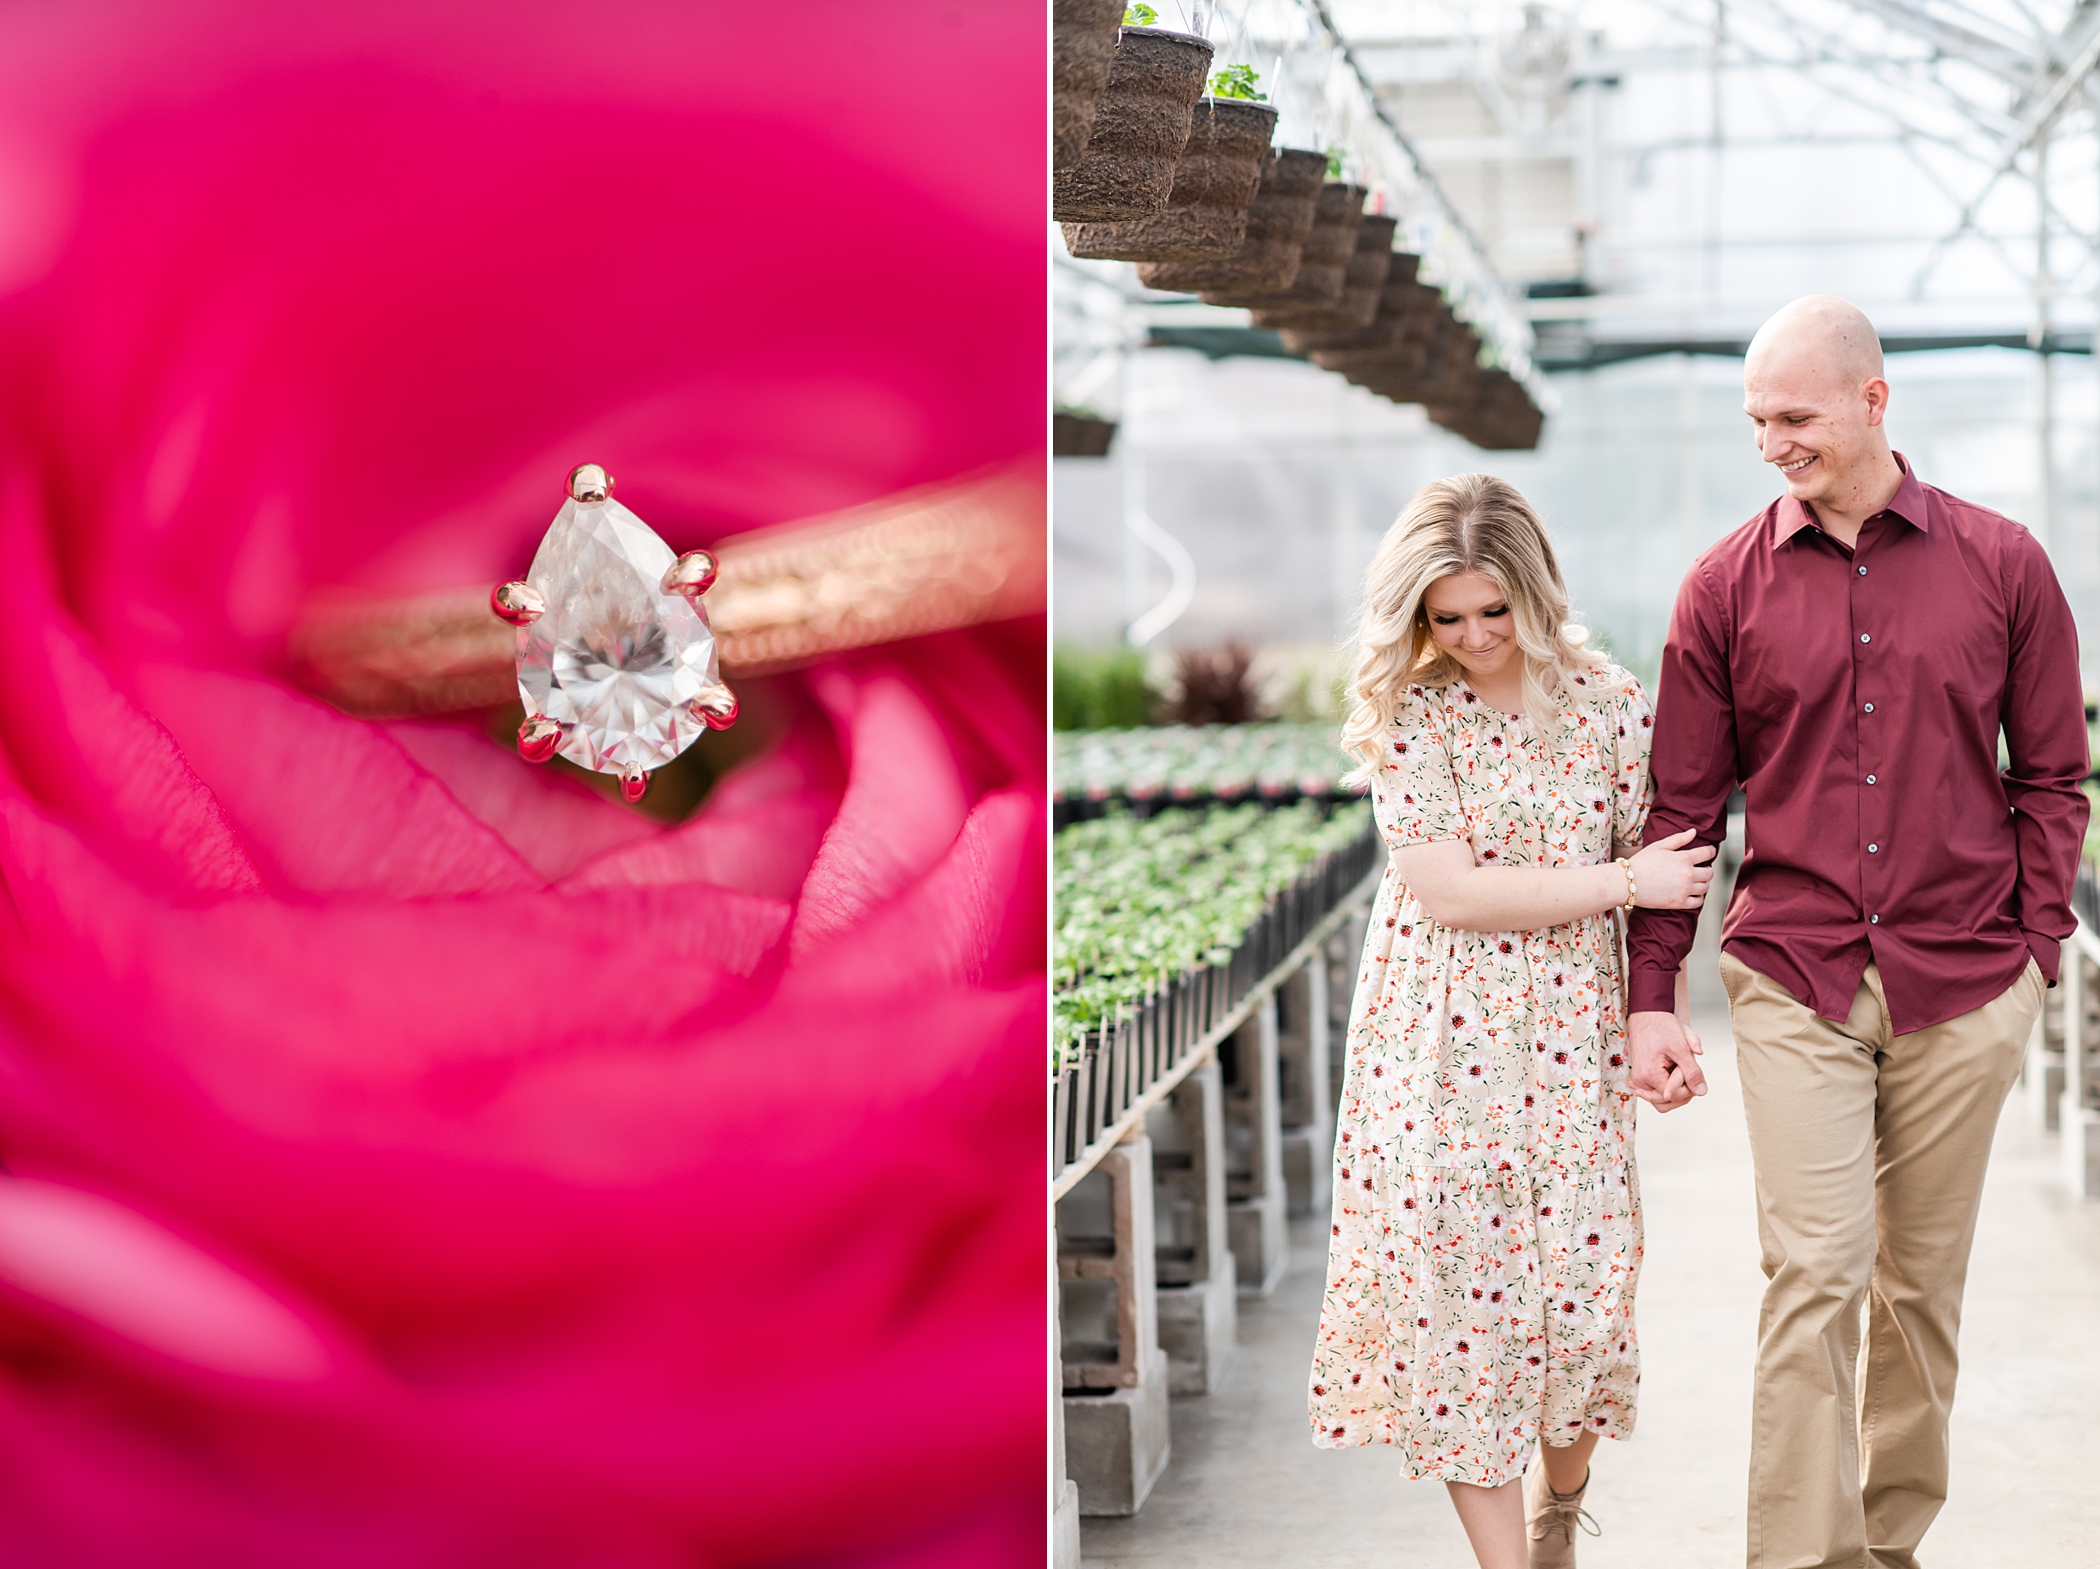 Engagements in a greenhouse